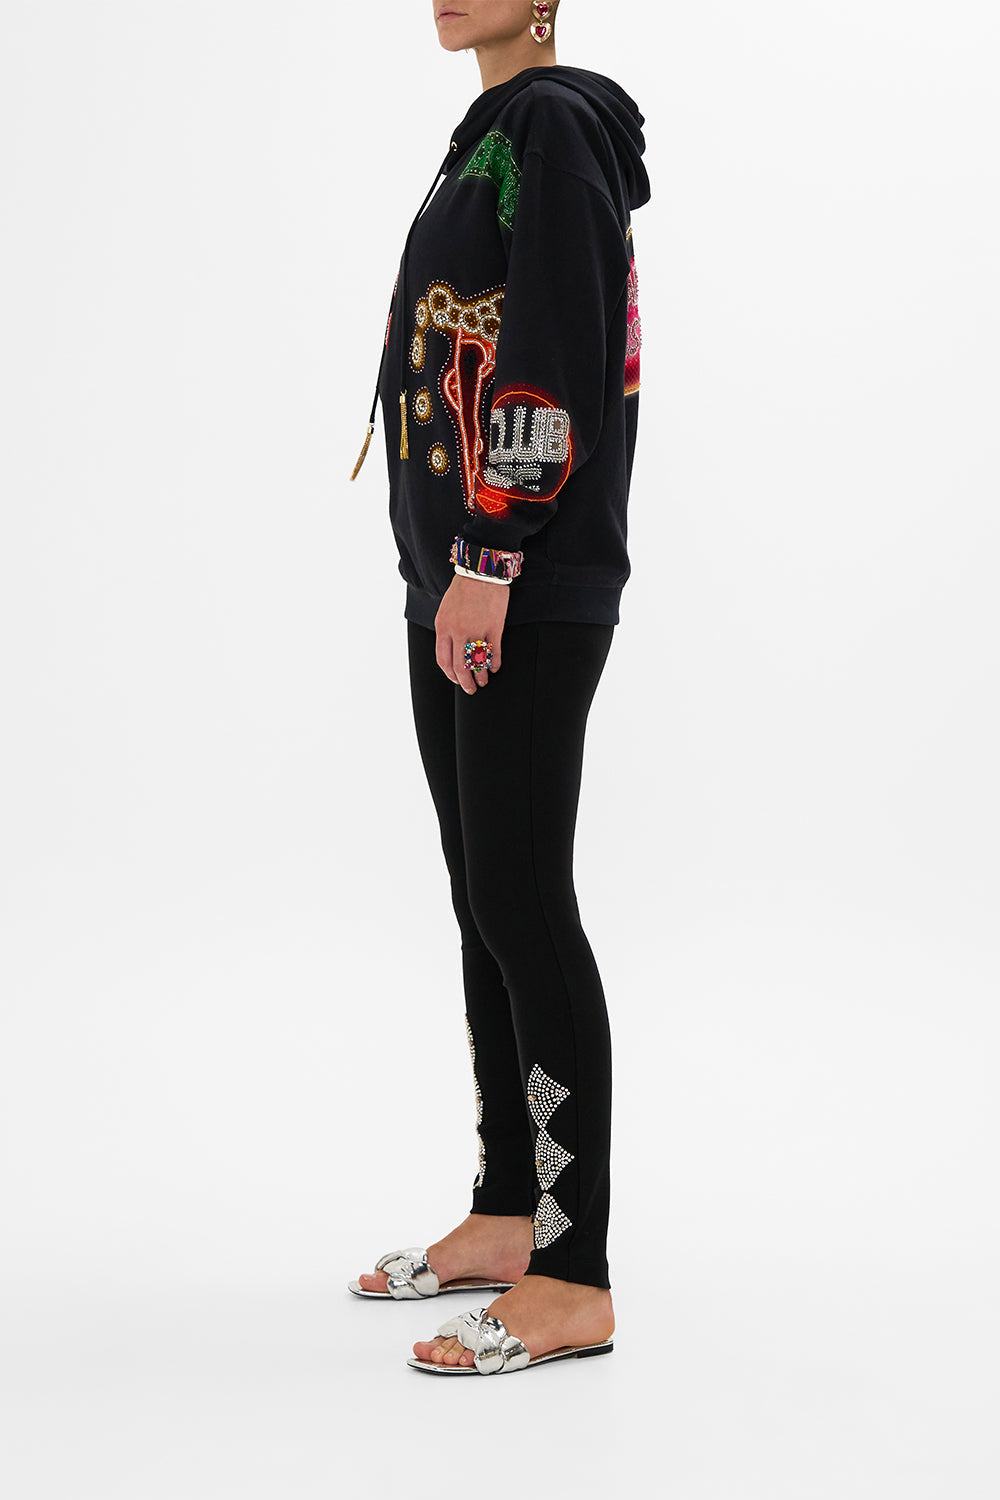 CAMILLA black  hoody with pockets in Electric Loveland print.